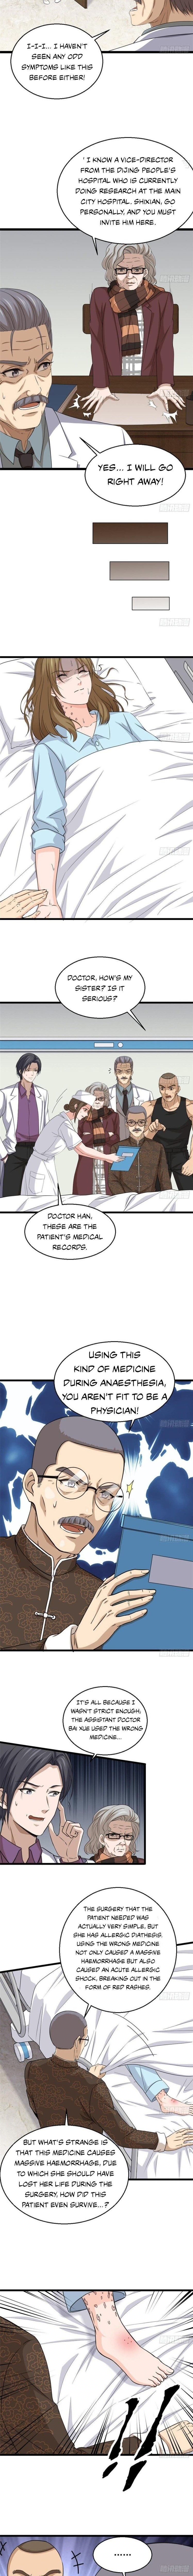 Capital's Most Crazy Doctor - Page 3